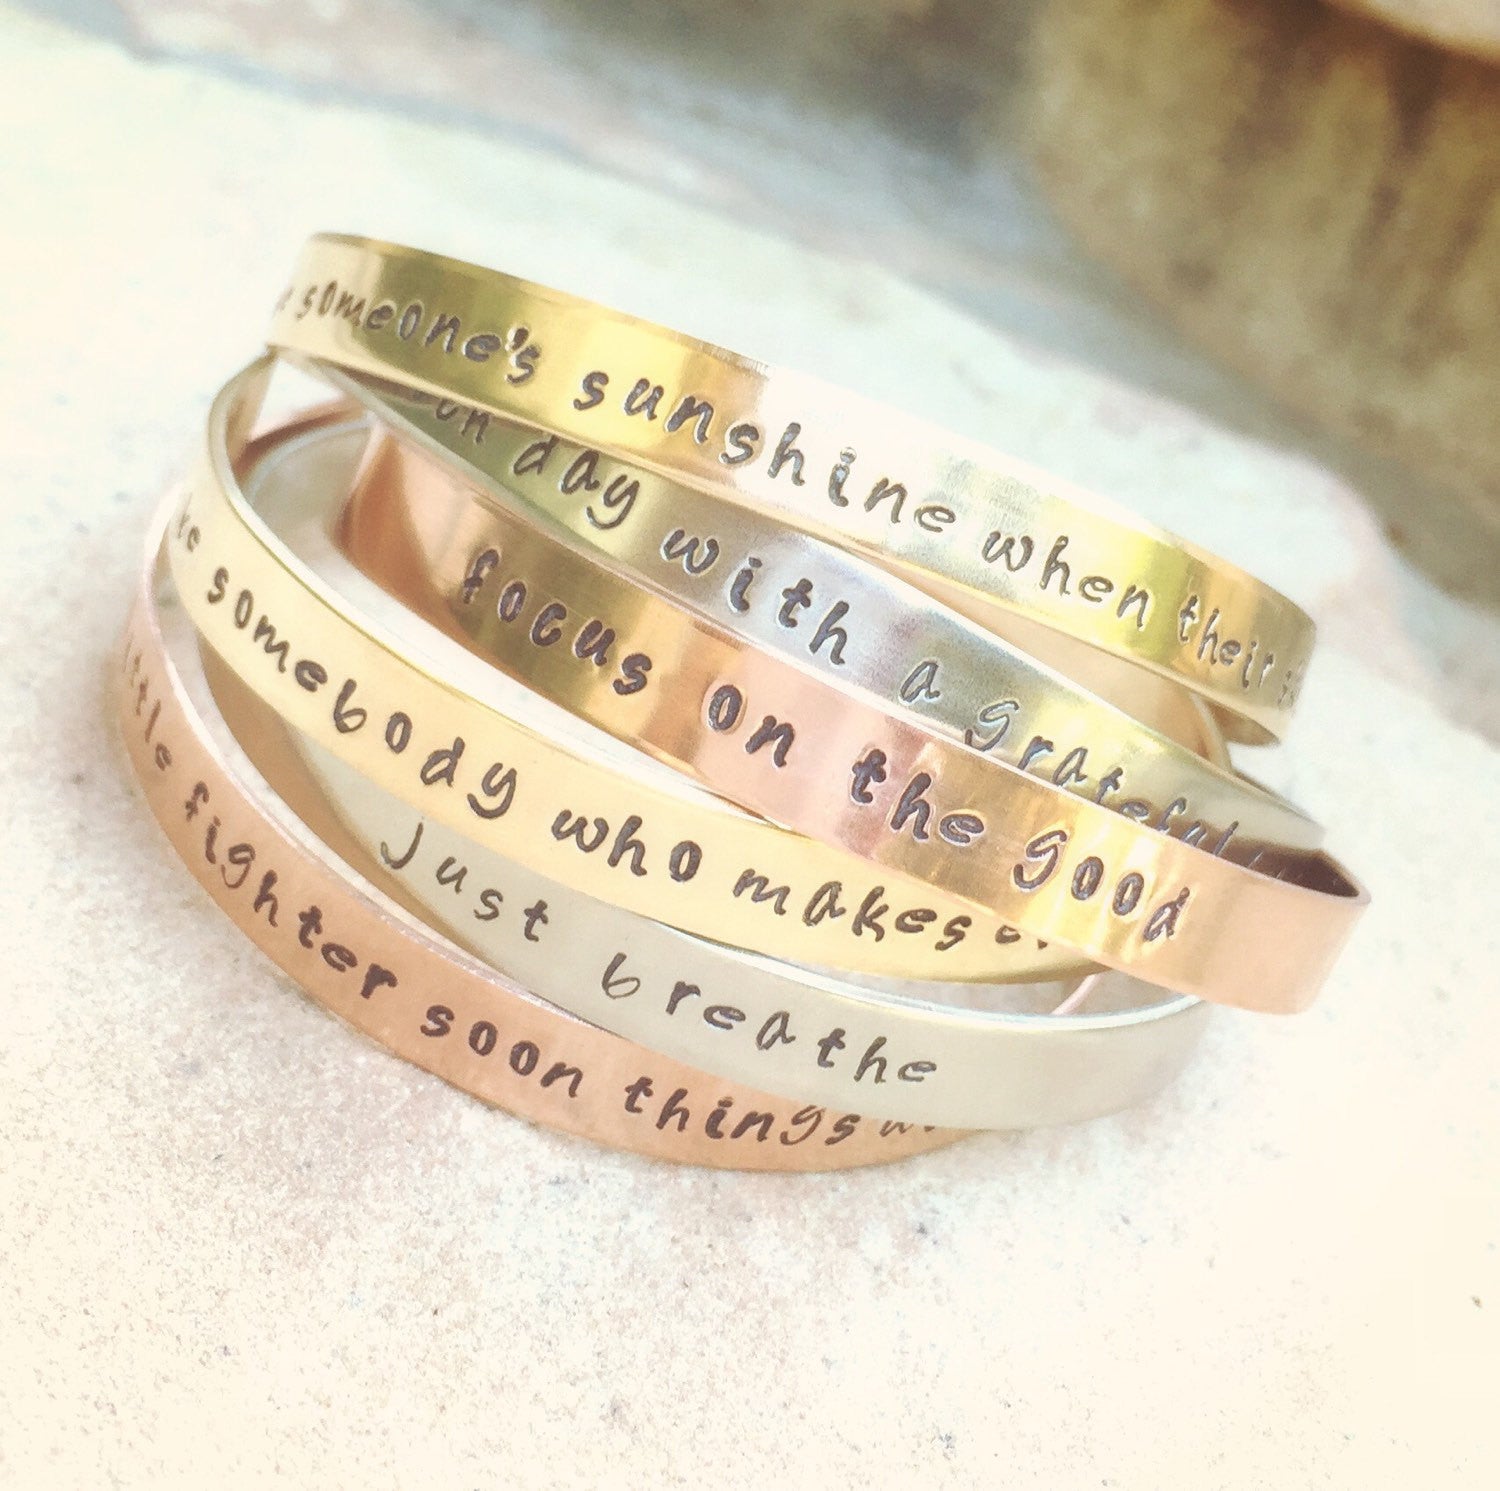 Inspirational Cuff Bracelets, Personalized - Natashaaloha, jewelry, bracelets, necklace, keychains, fishing lures, gifts for men, charms, personalized, 